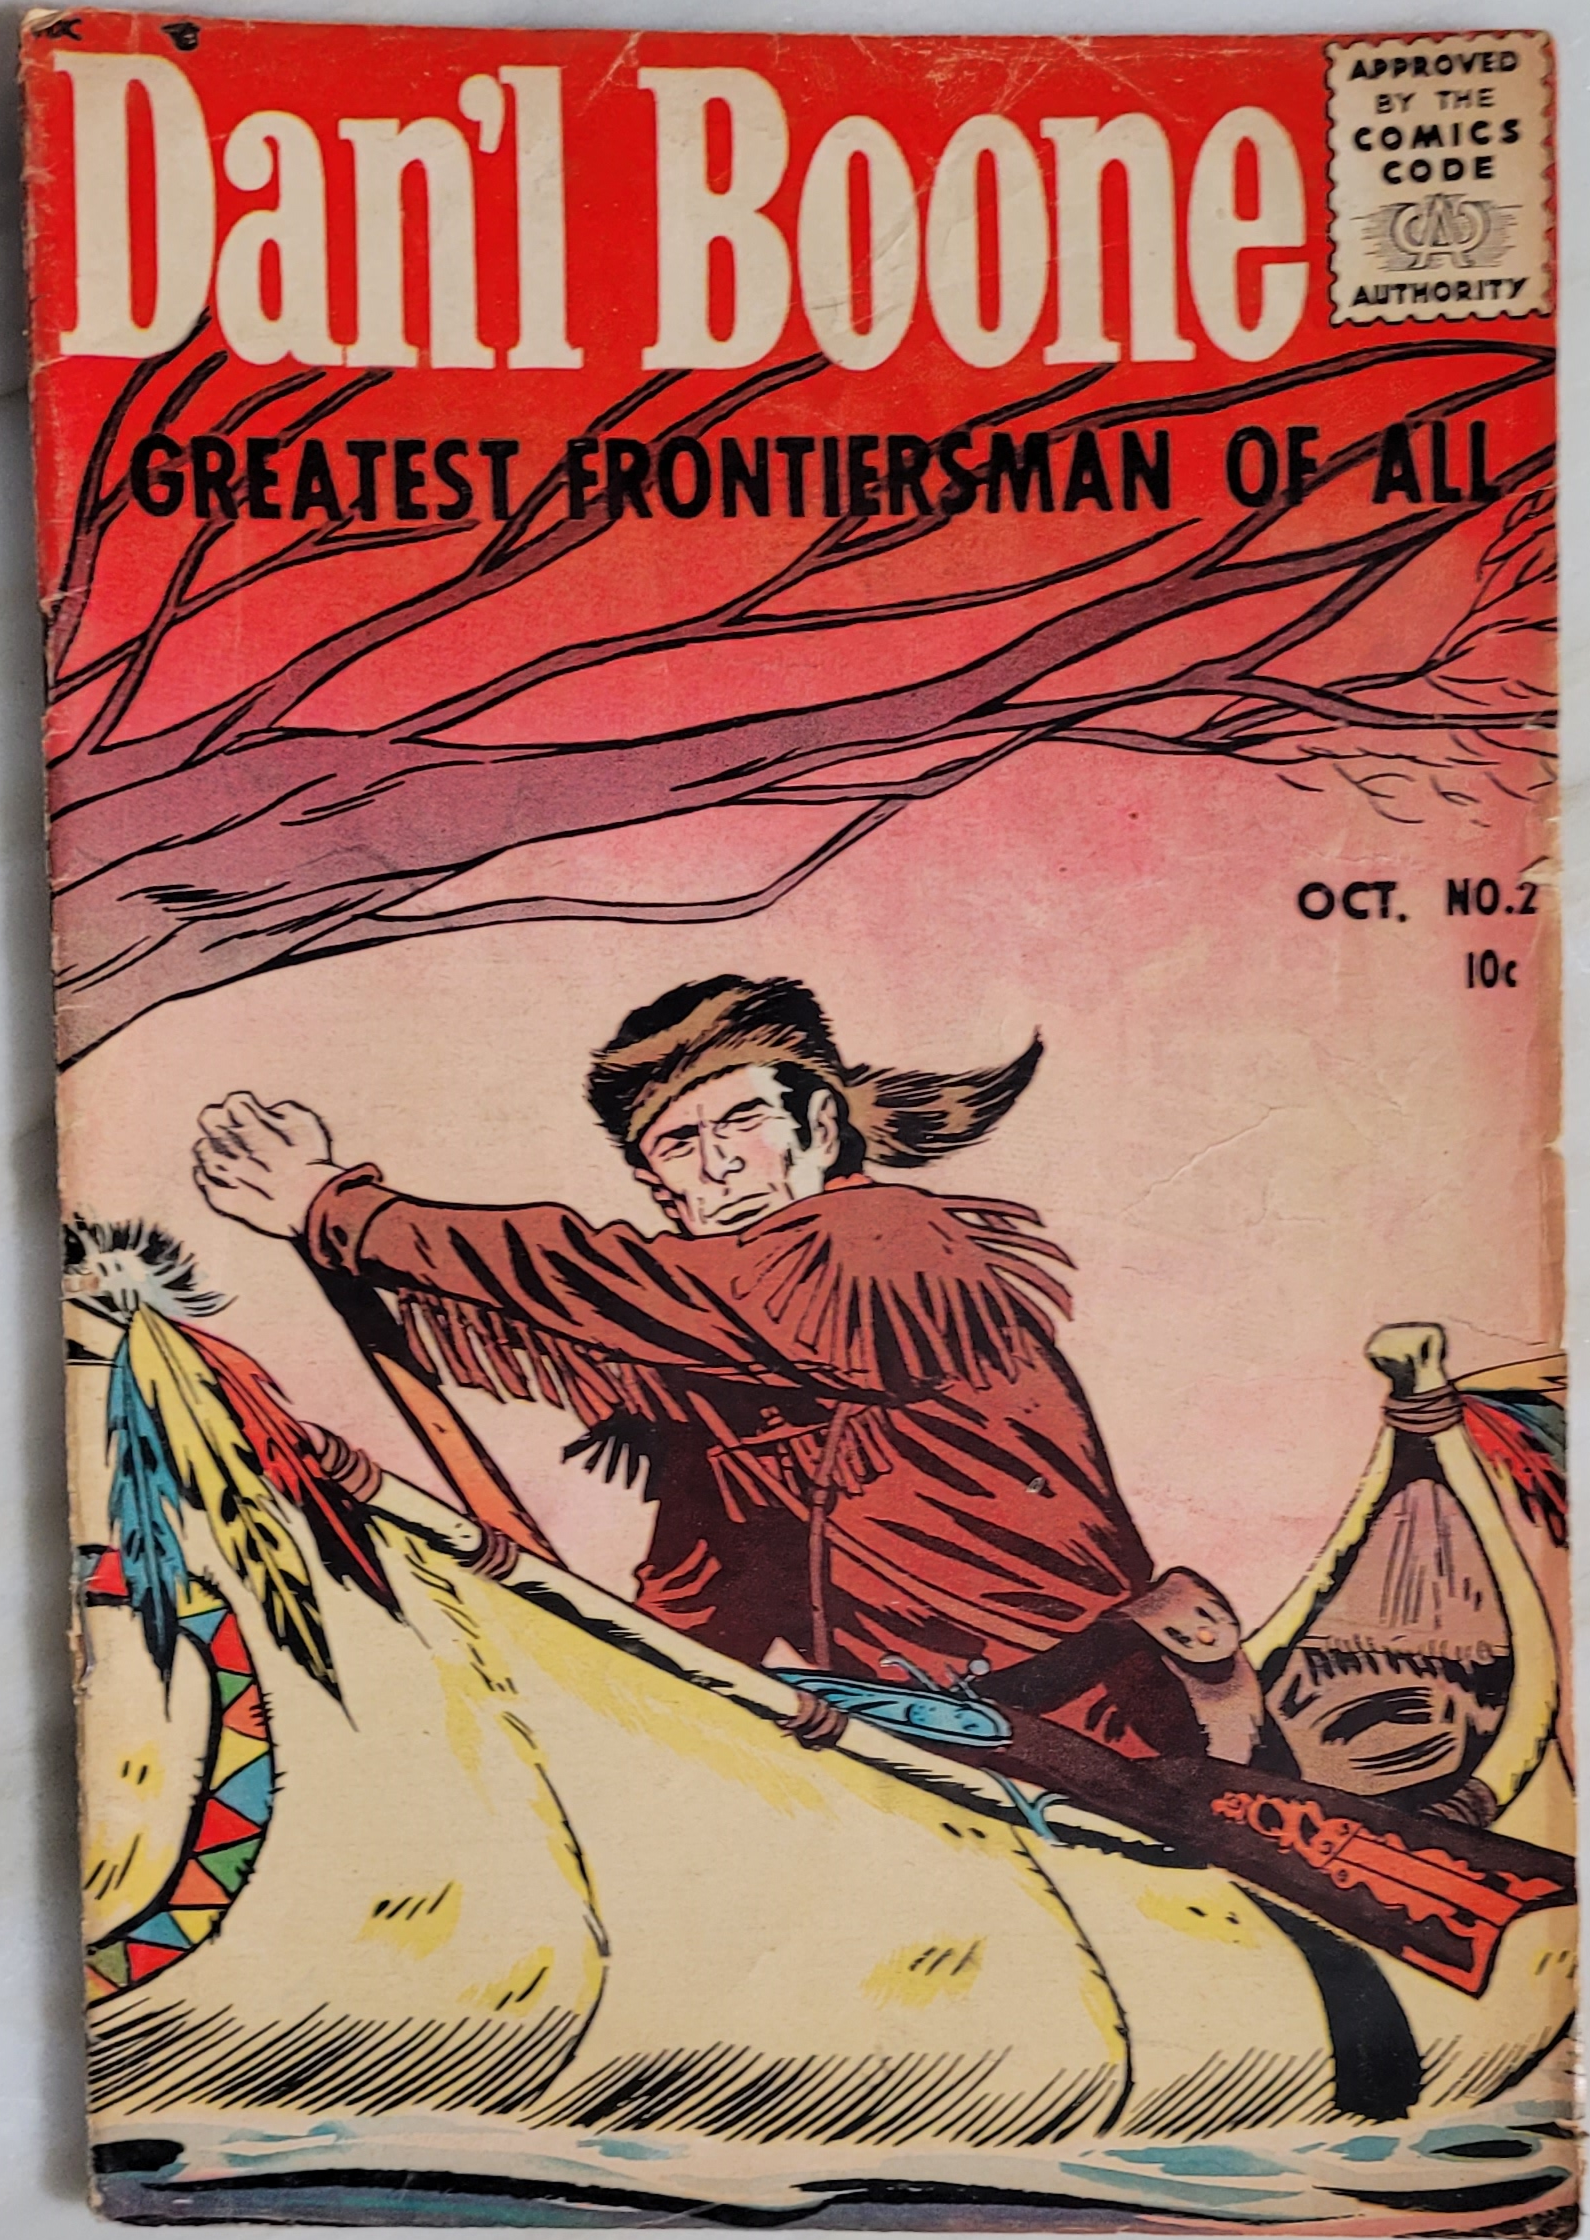 Dan'l Boone: Greatest Frontiersman of All #2 - Front Cover